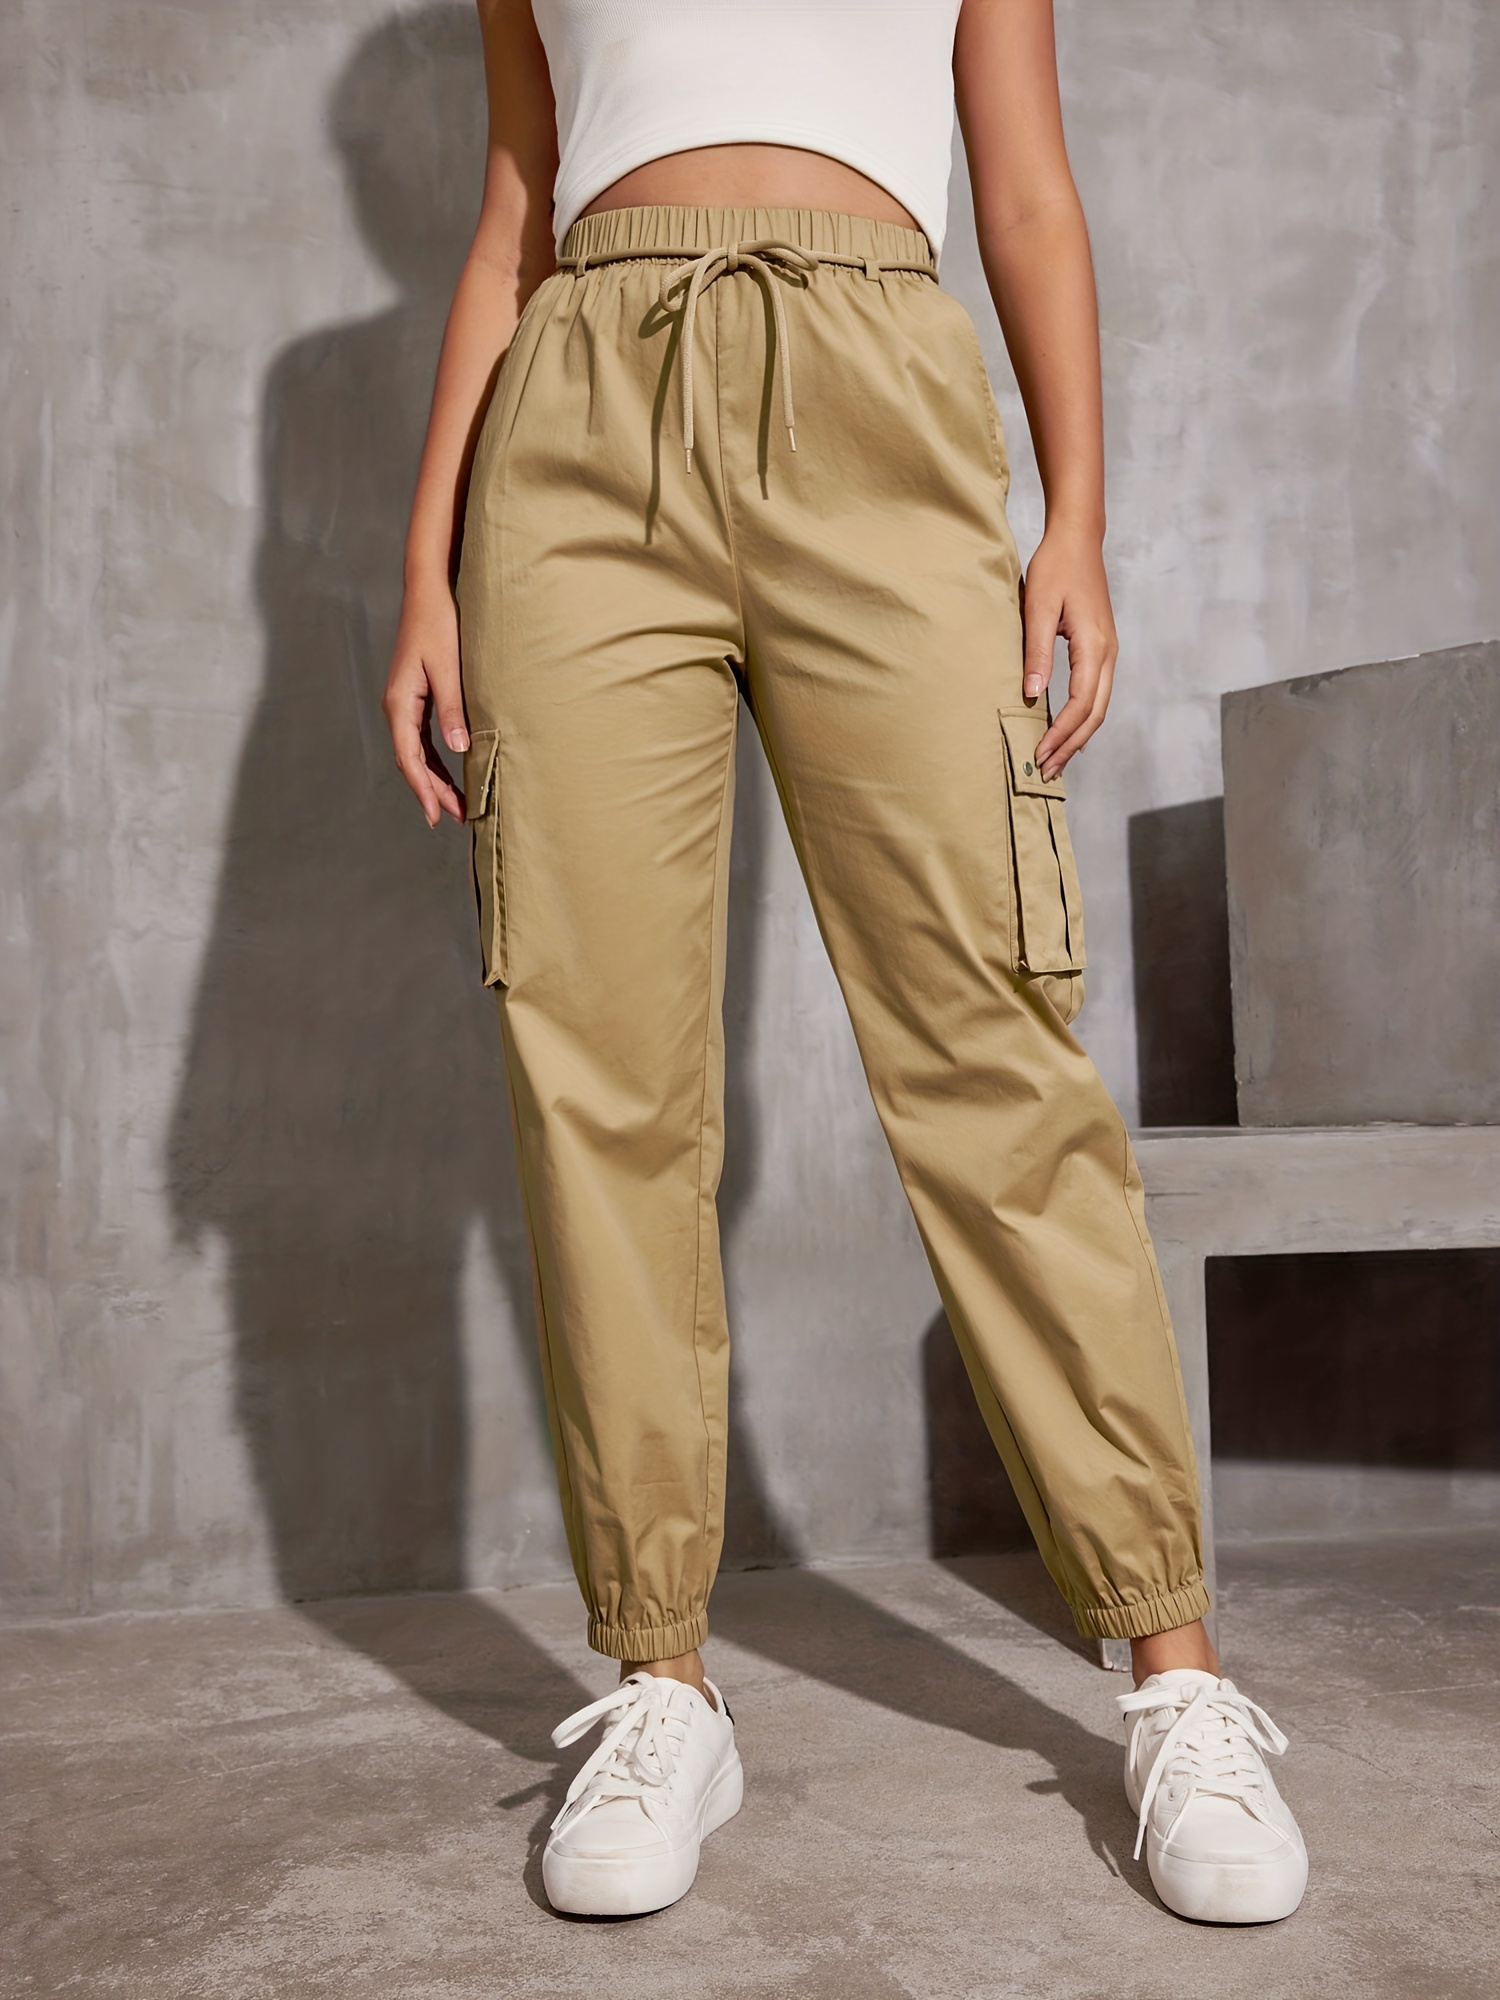 SHEIN Solid Color Teen Girls' Casual Sporty High Waisted Cargo Pants